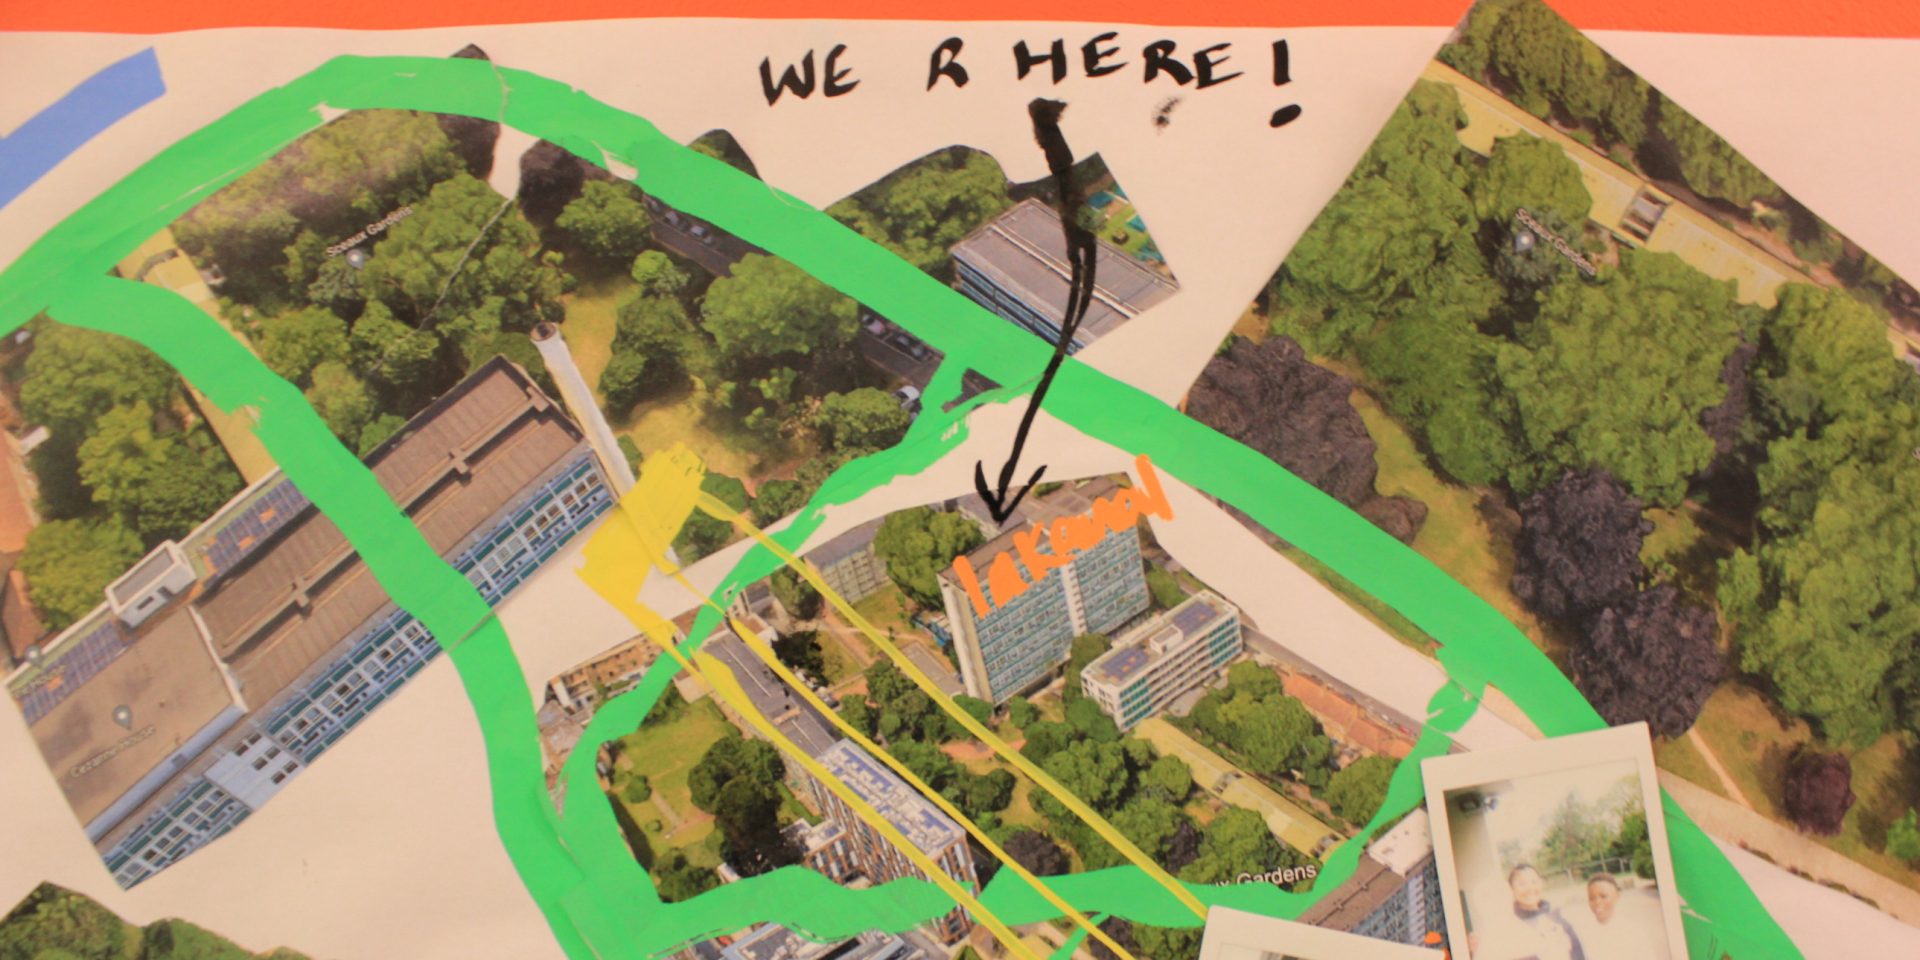 A handmade collage map with text that says We Are Here and an arrow pointing to one of the buildings on the map.